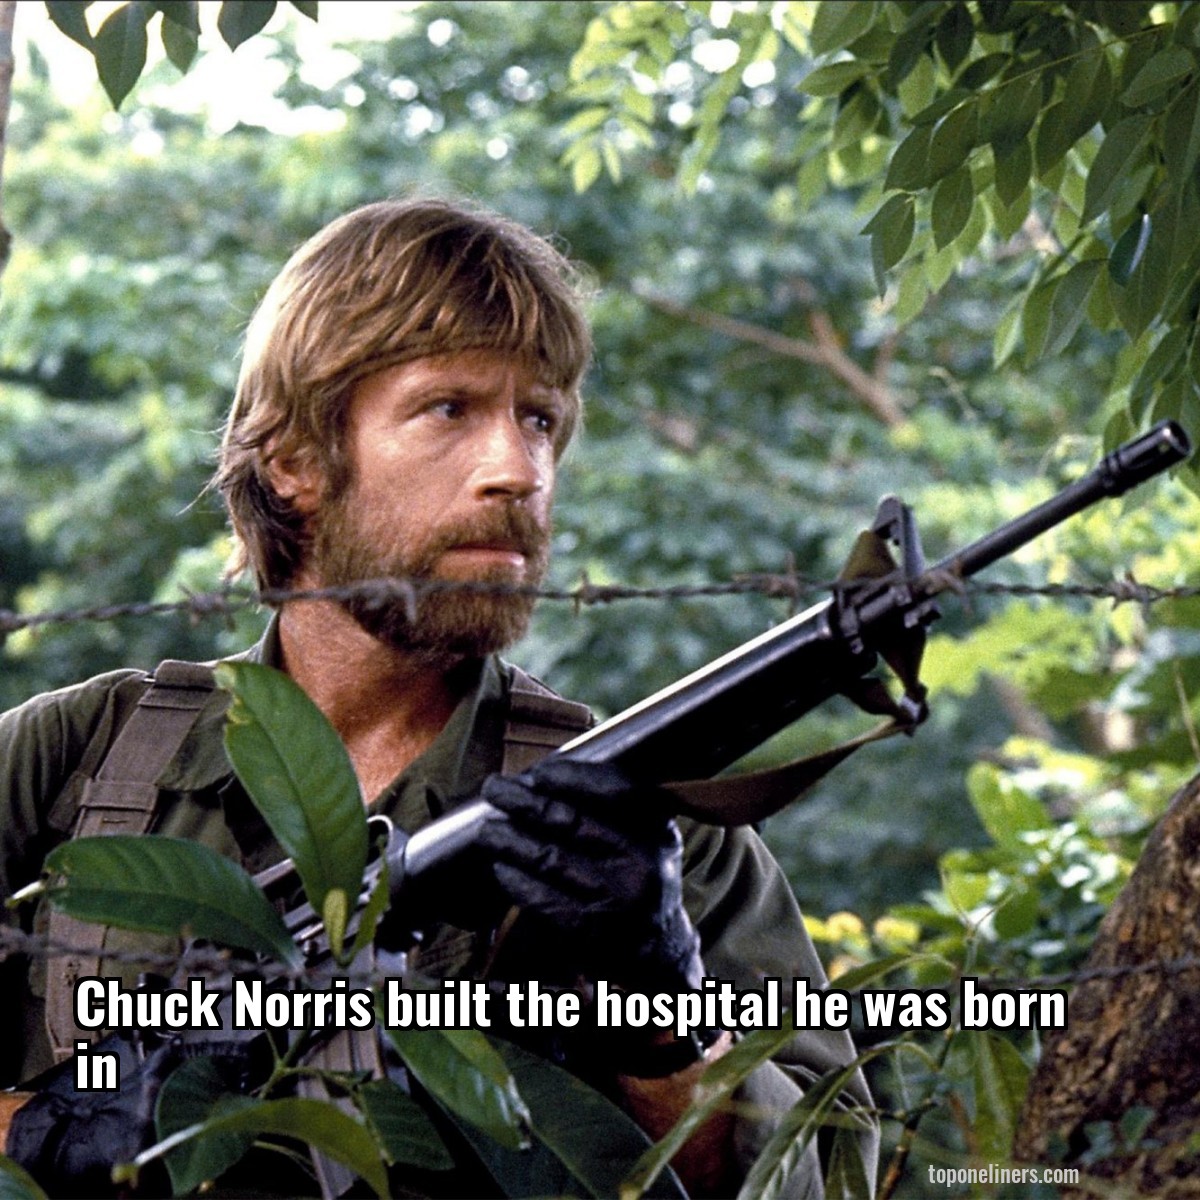 Chuck Norris built the hospital he was born in